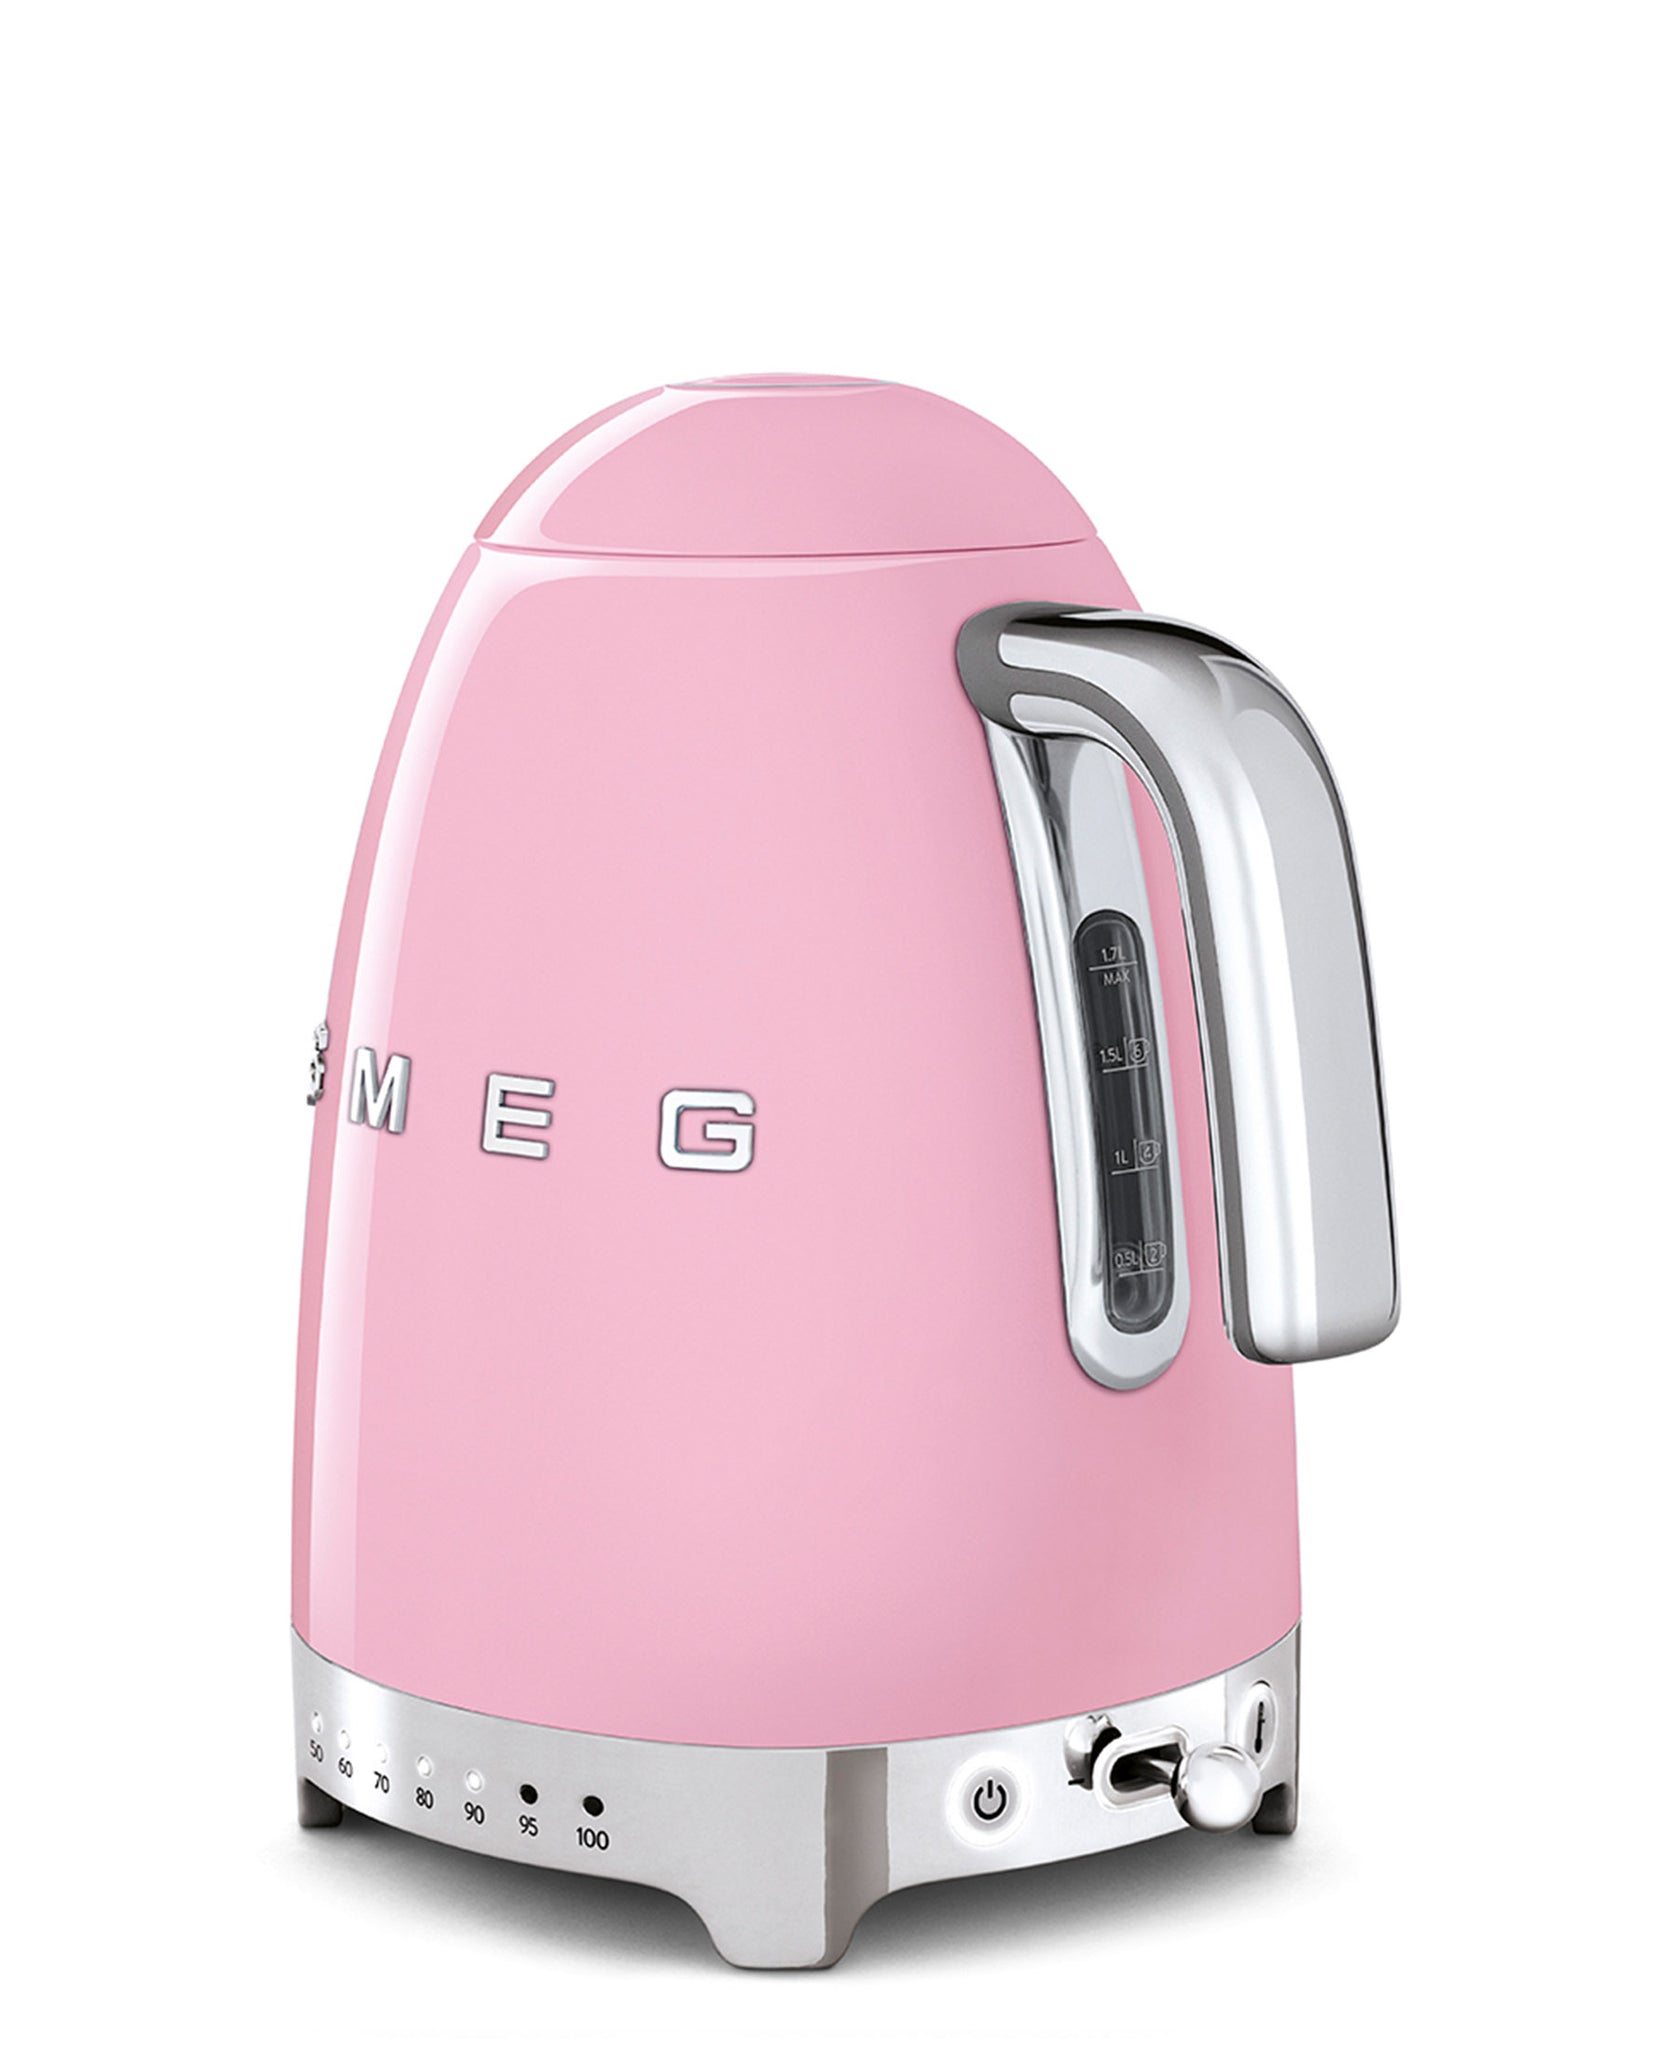 Smeg 50's Style Retro Variable Temperature Kettle - Pink